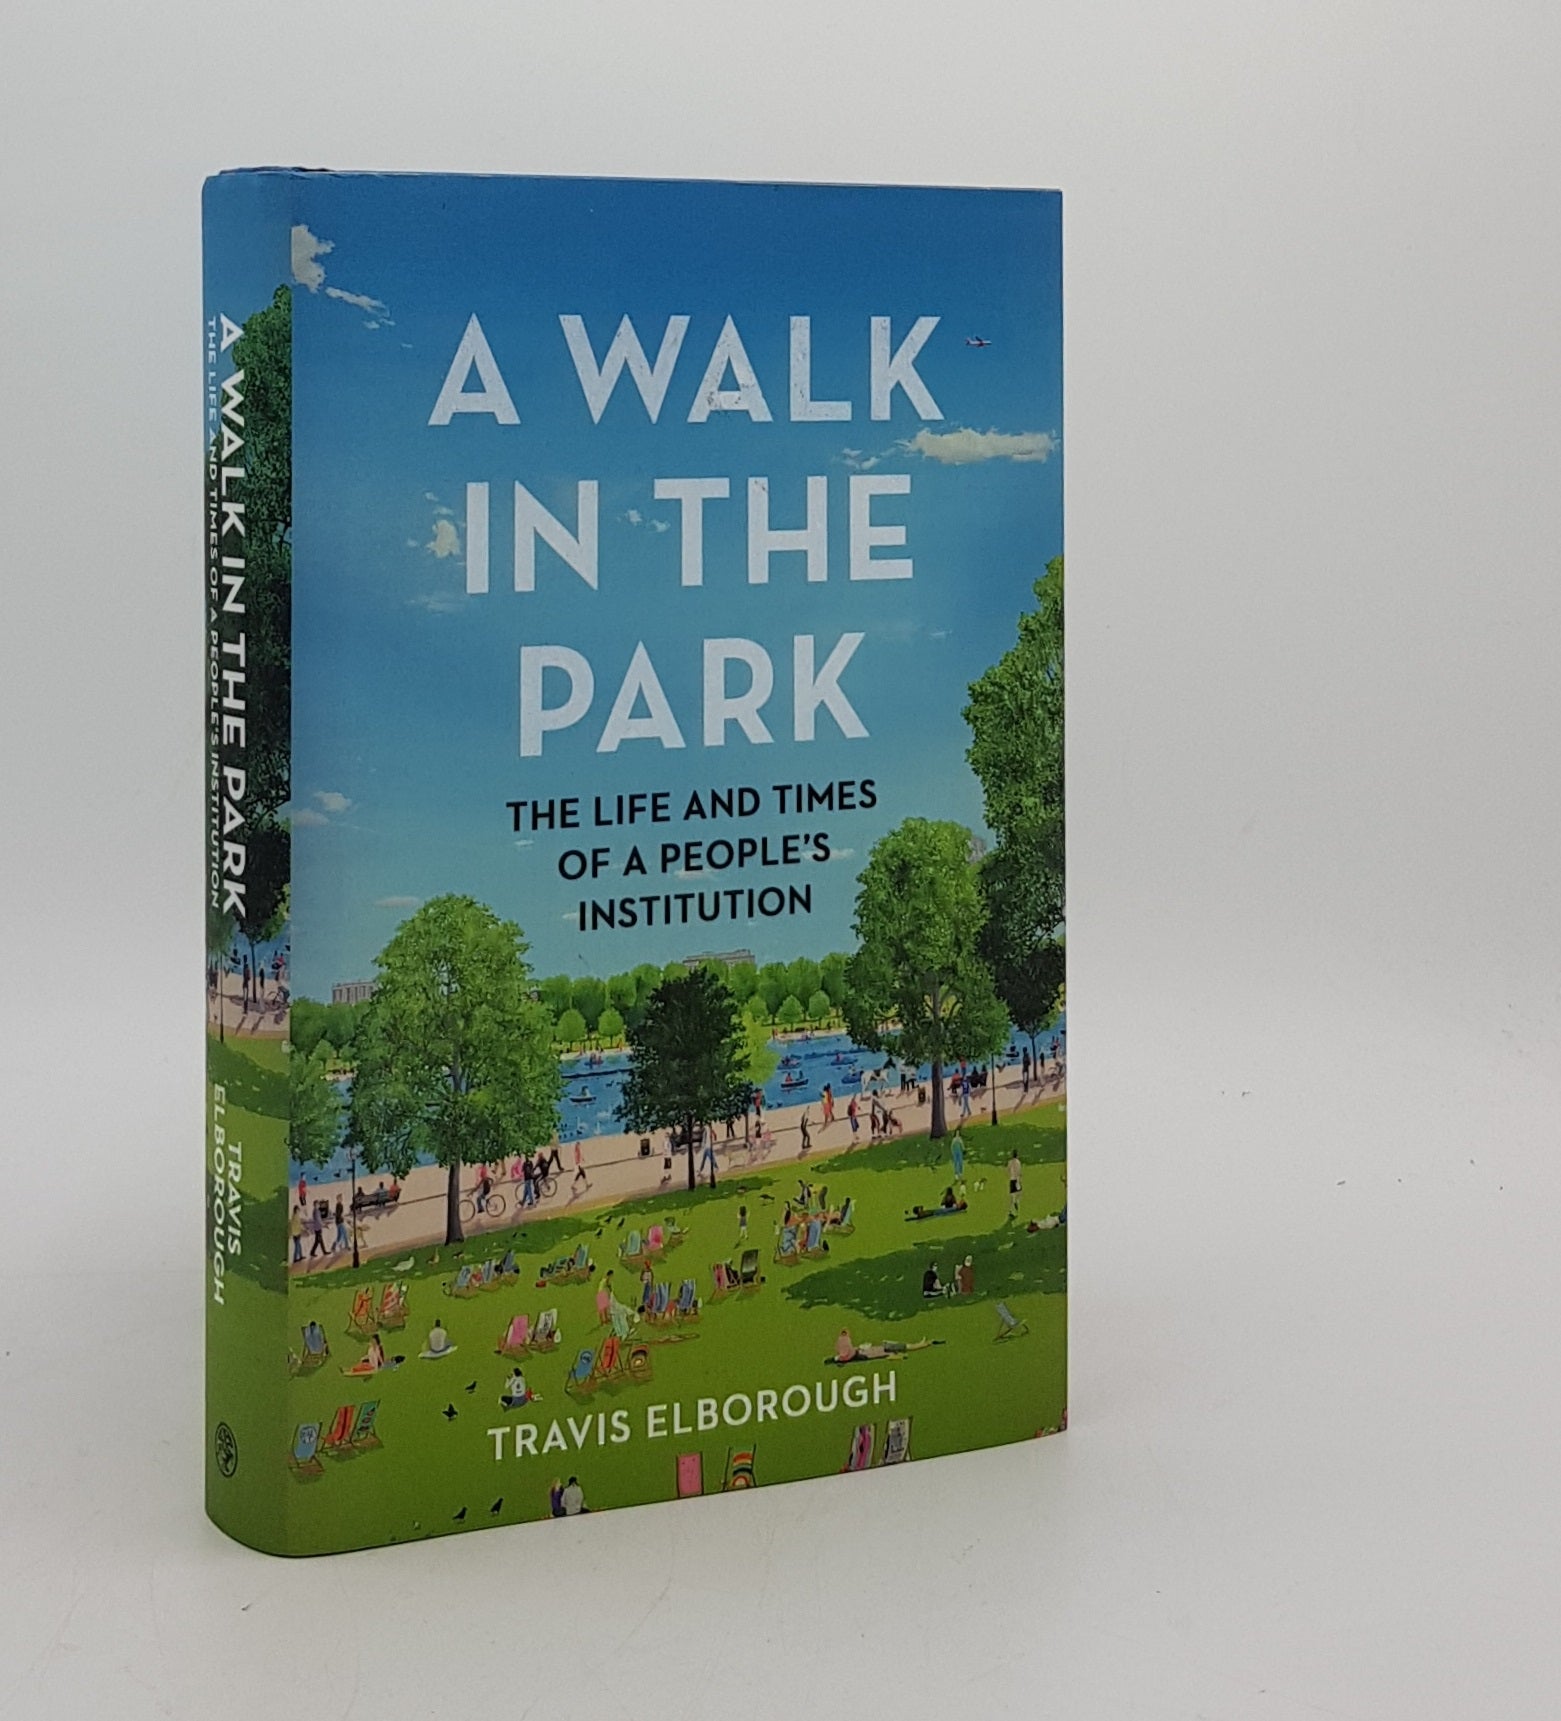 ELBOROUGH Travis - A Walk in the Park the Life and Times of a People's Institution